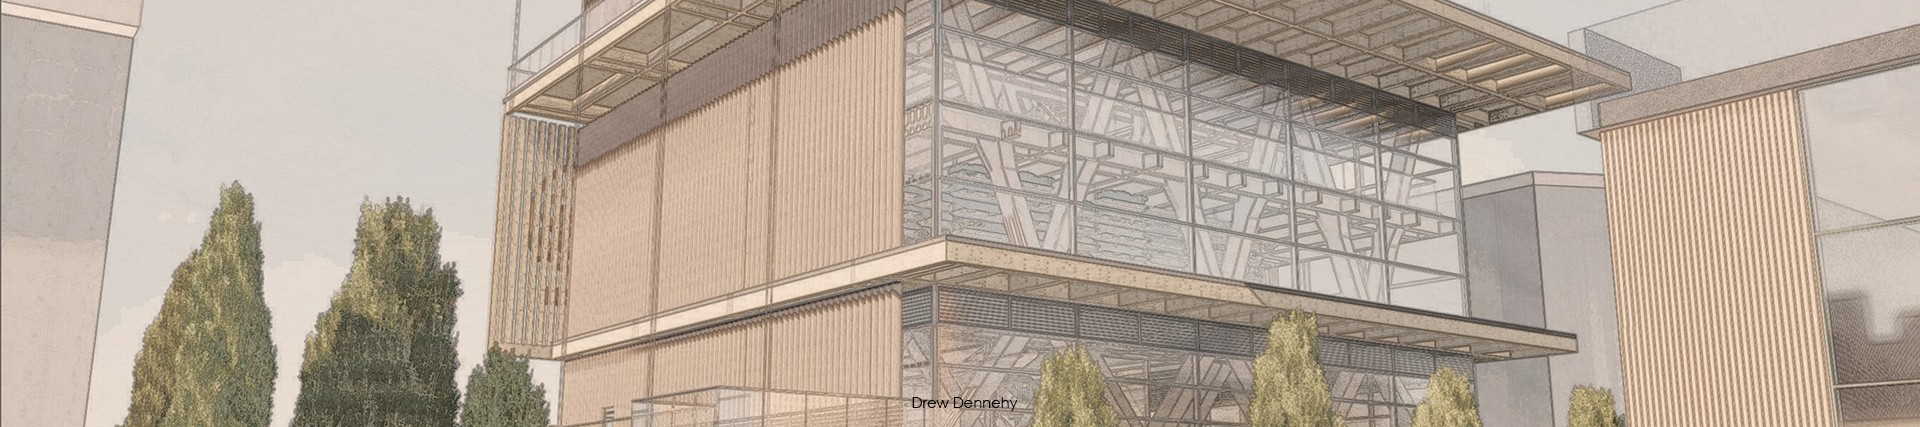 A glass and timber building lifted roughly ten feet above the ground by diagonal supports; a long flight of stairs leads up to the main entrance; image credit Drew Dennehy.